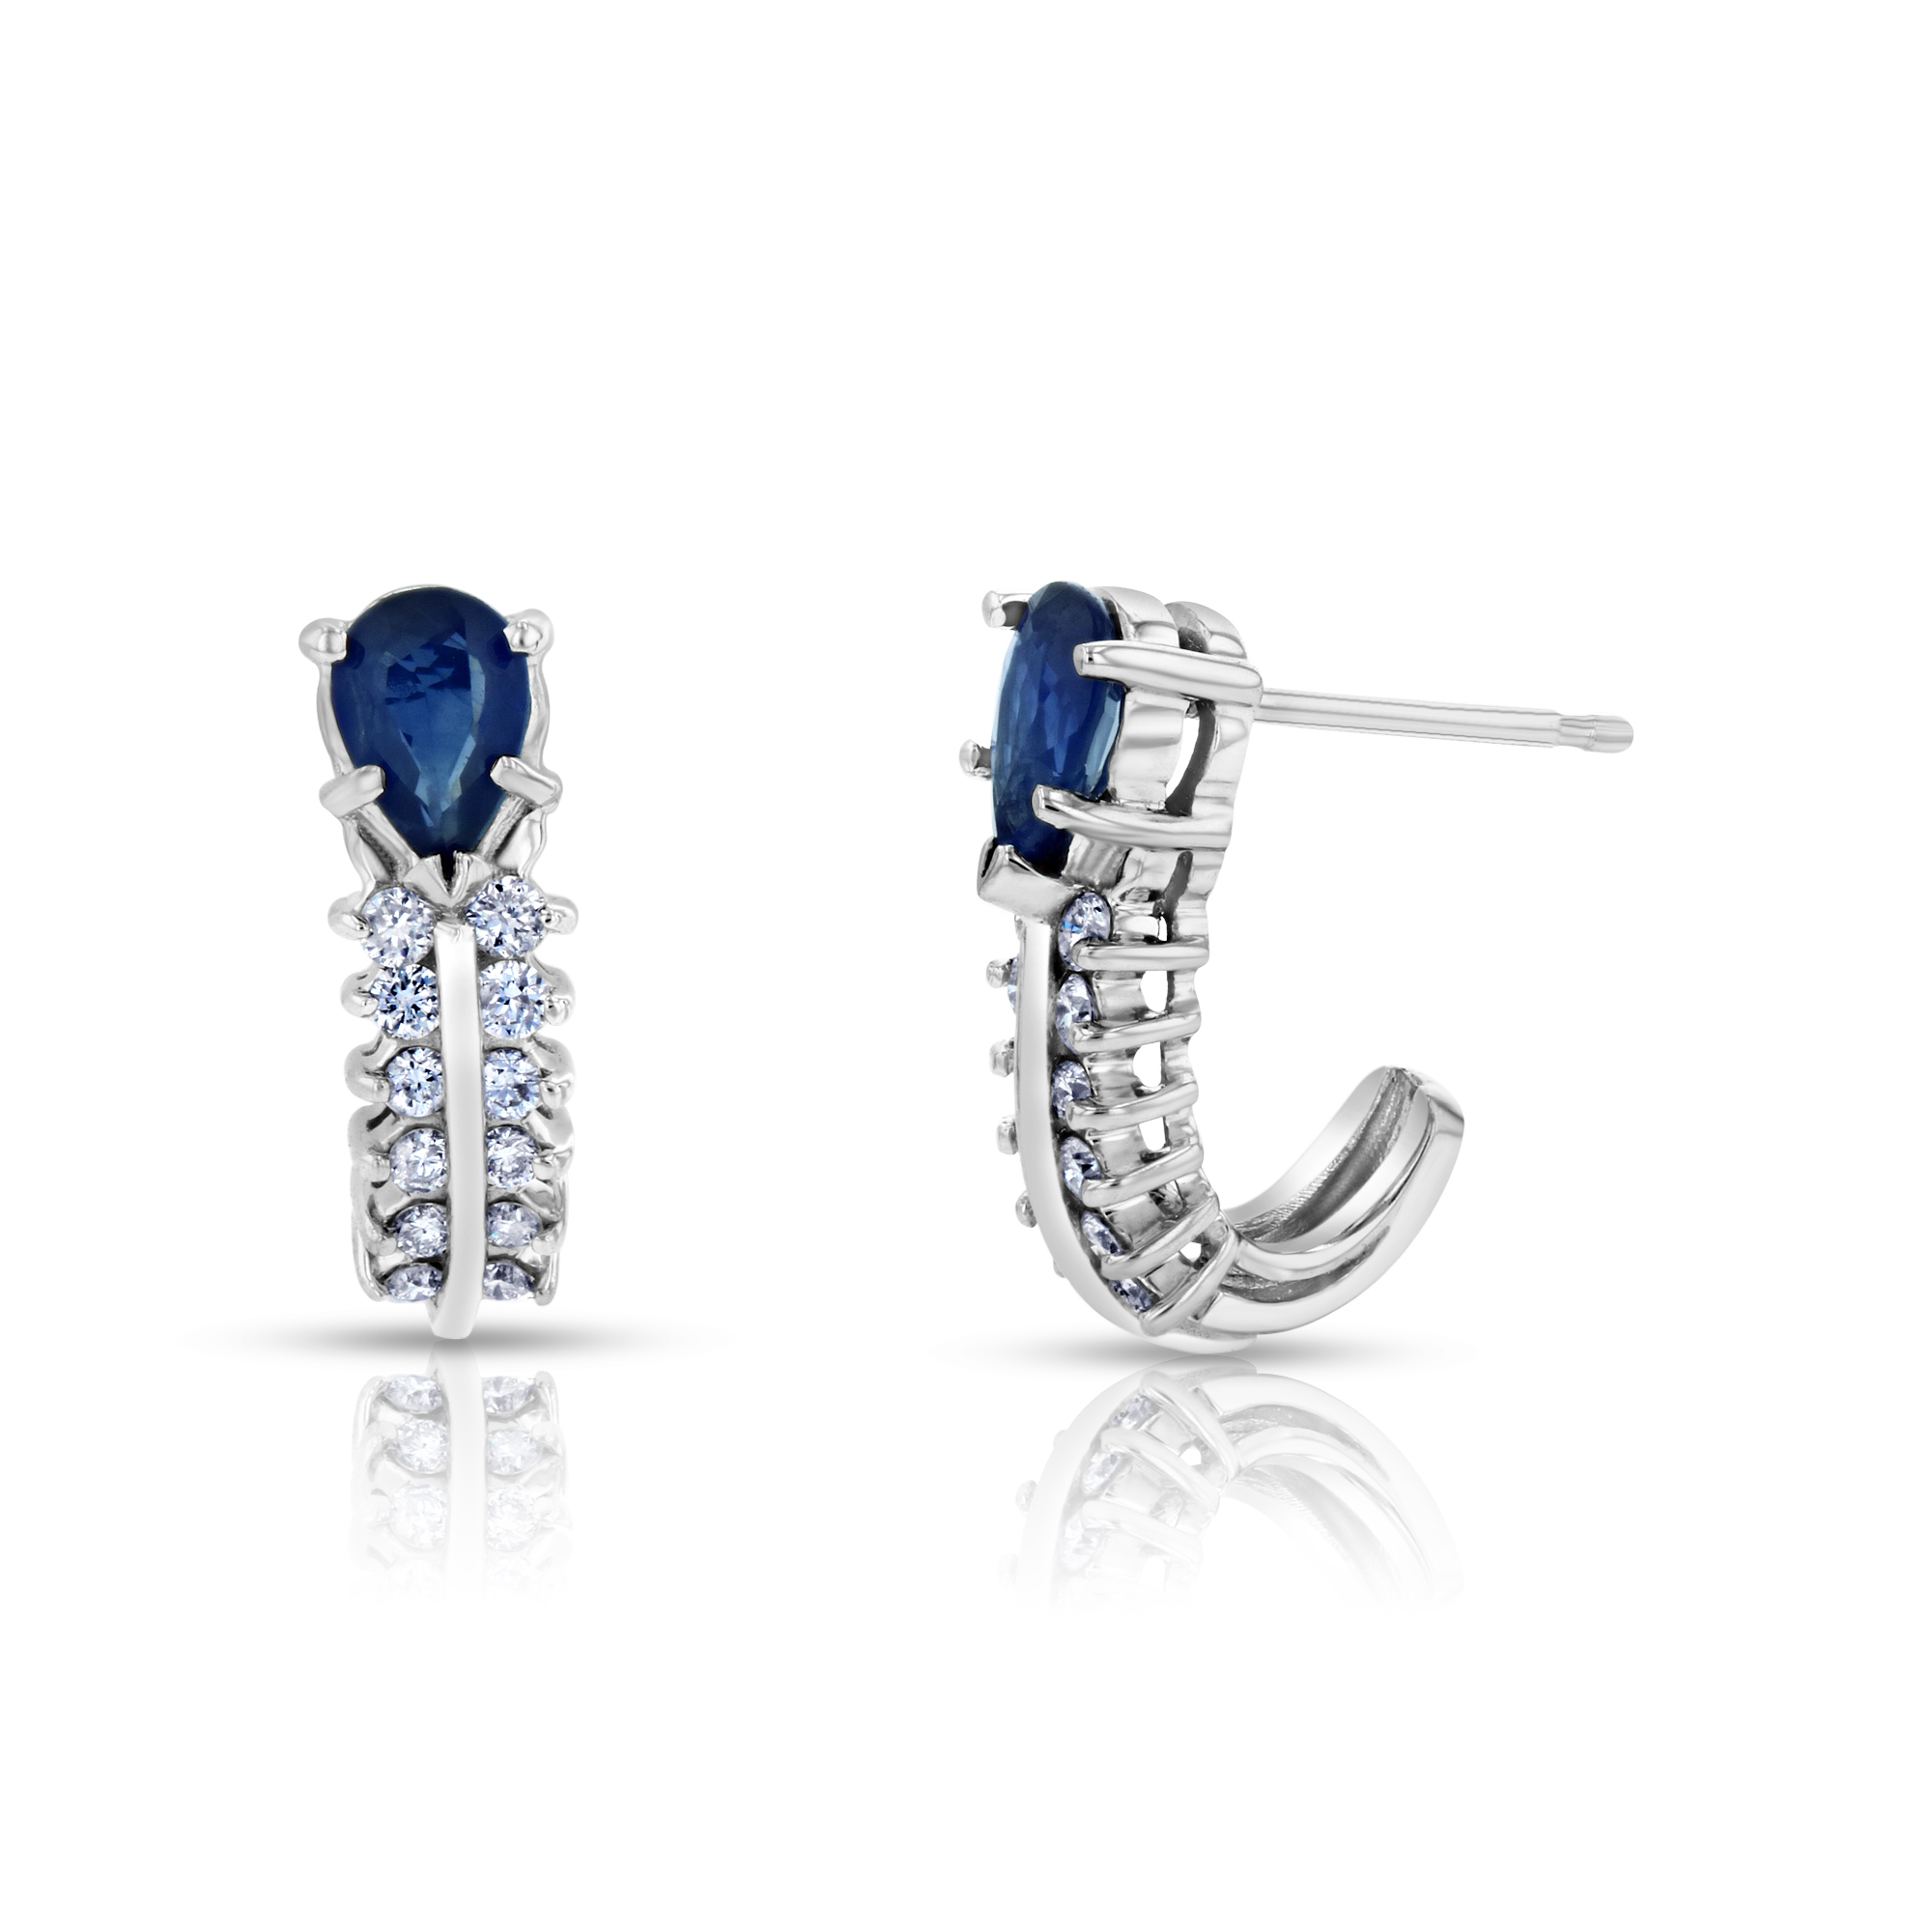 View 0.30ctw Diamonds and Sapphire Earrings in 14k White Gold